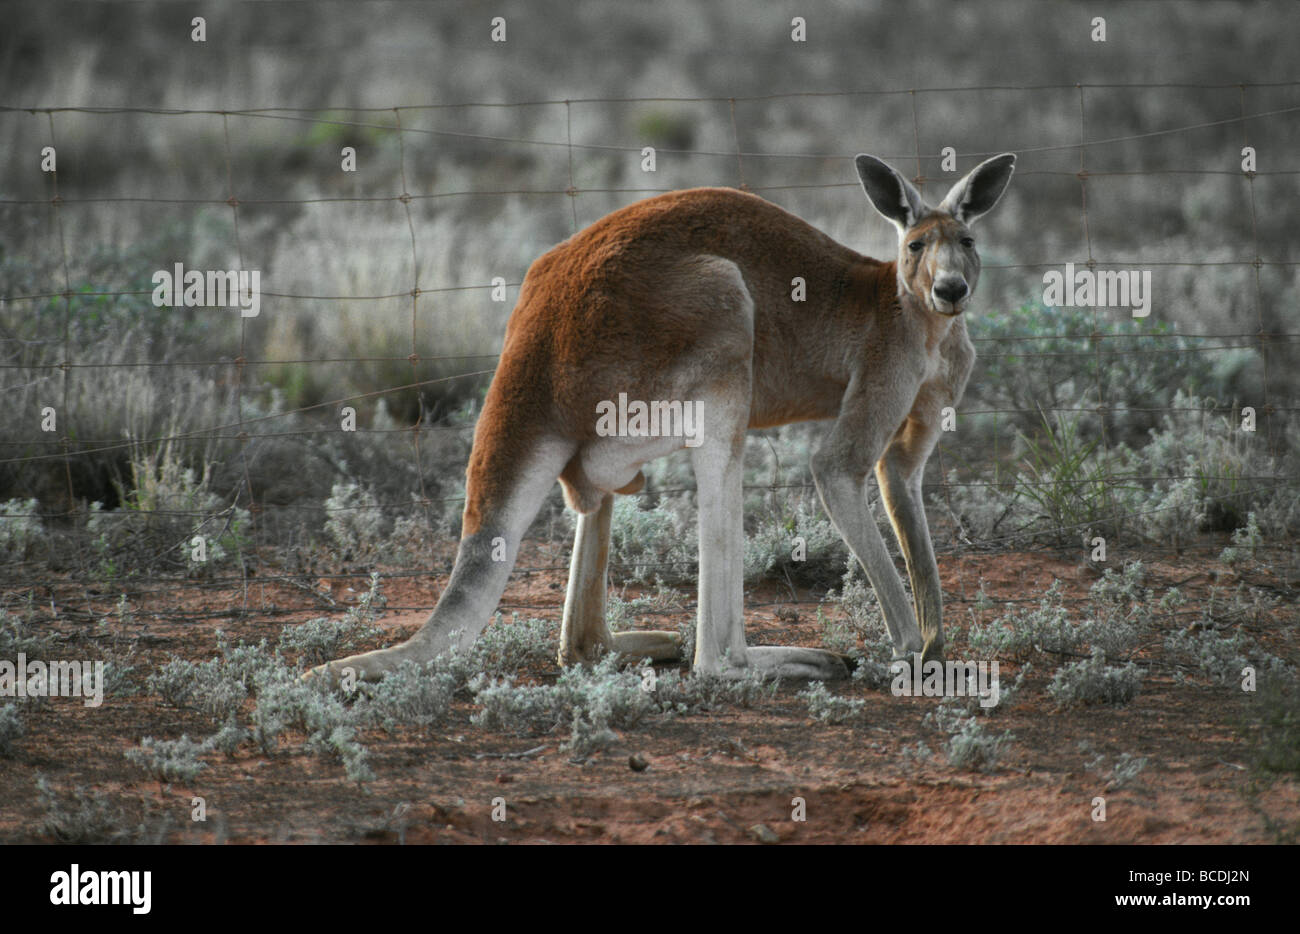 A male Red Kangaroo against a wire cattle fence on a farm. Stock Photo